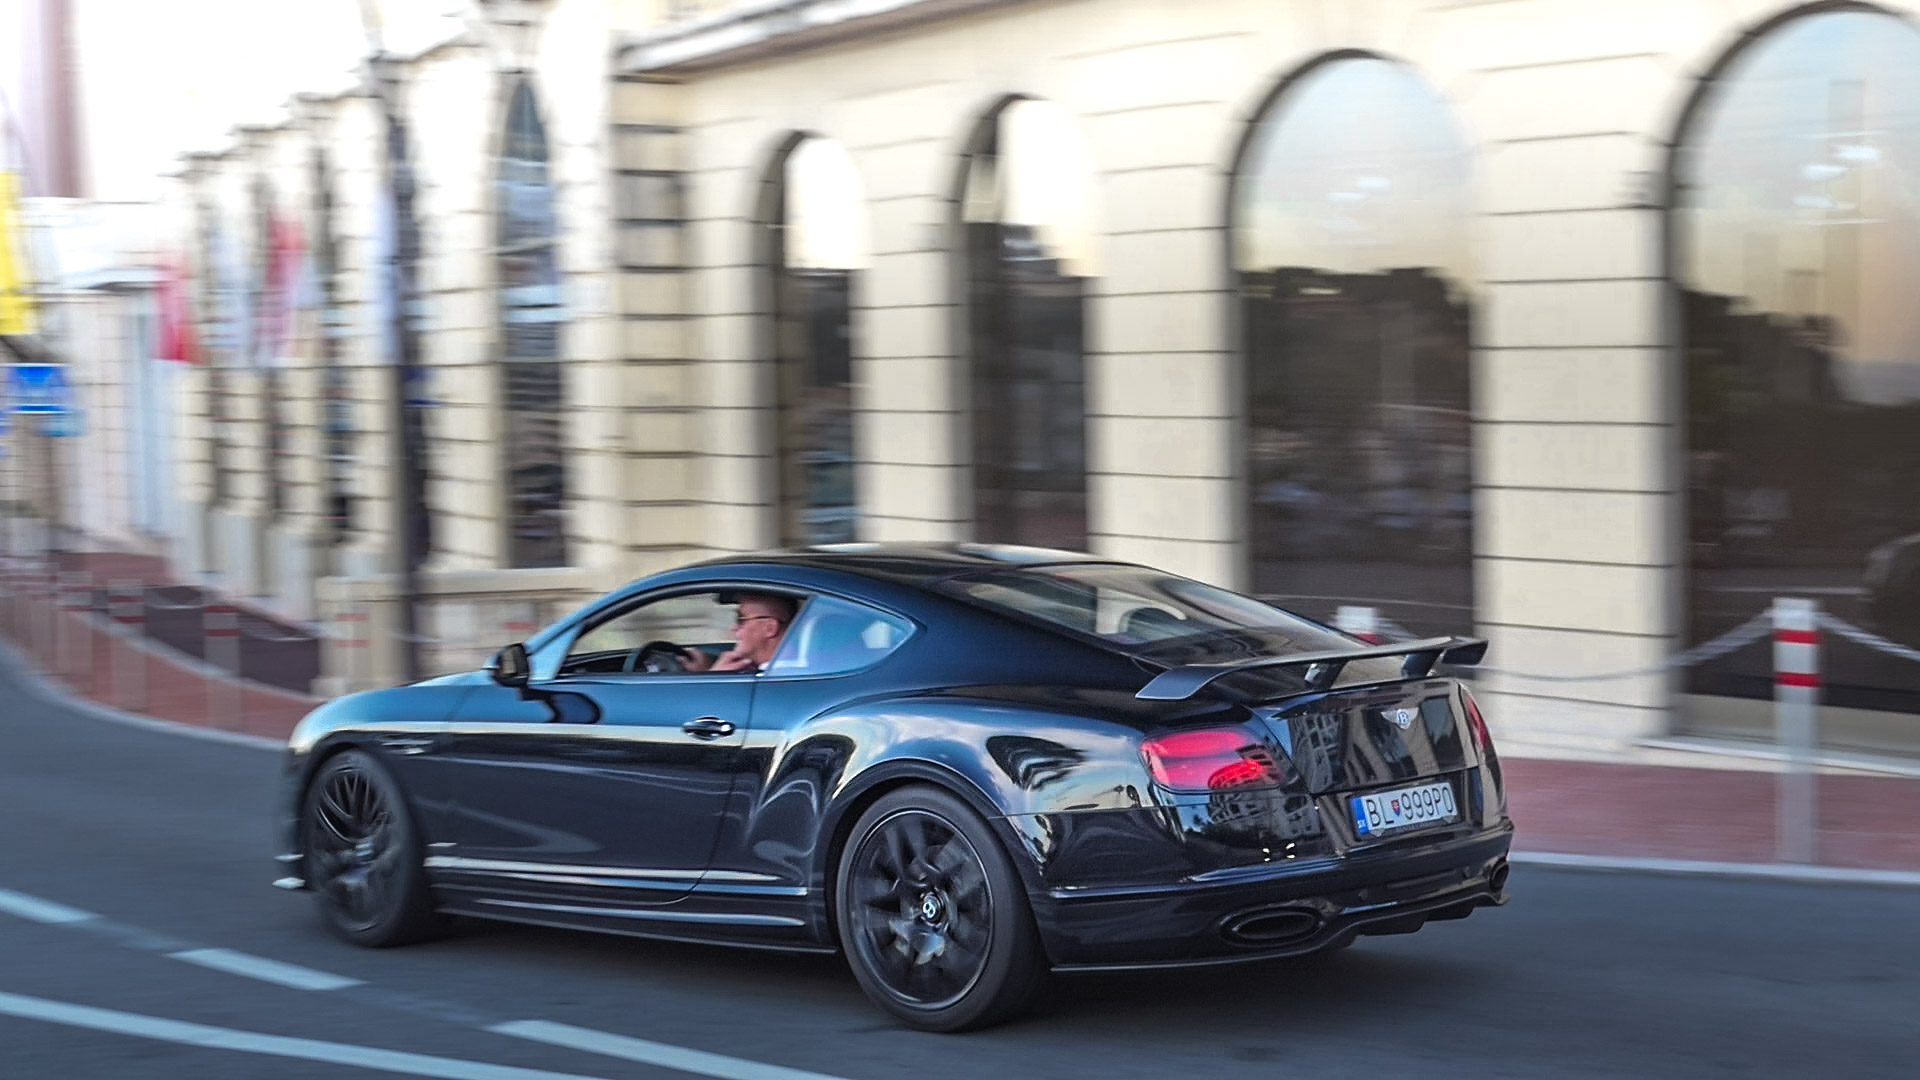 Bentley Continental GT Supersports - BL-999PO (SK)